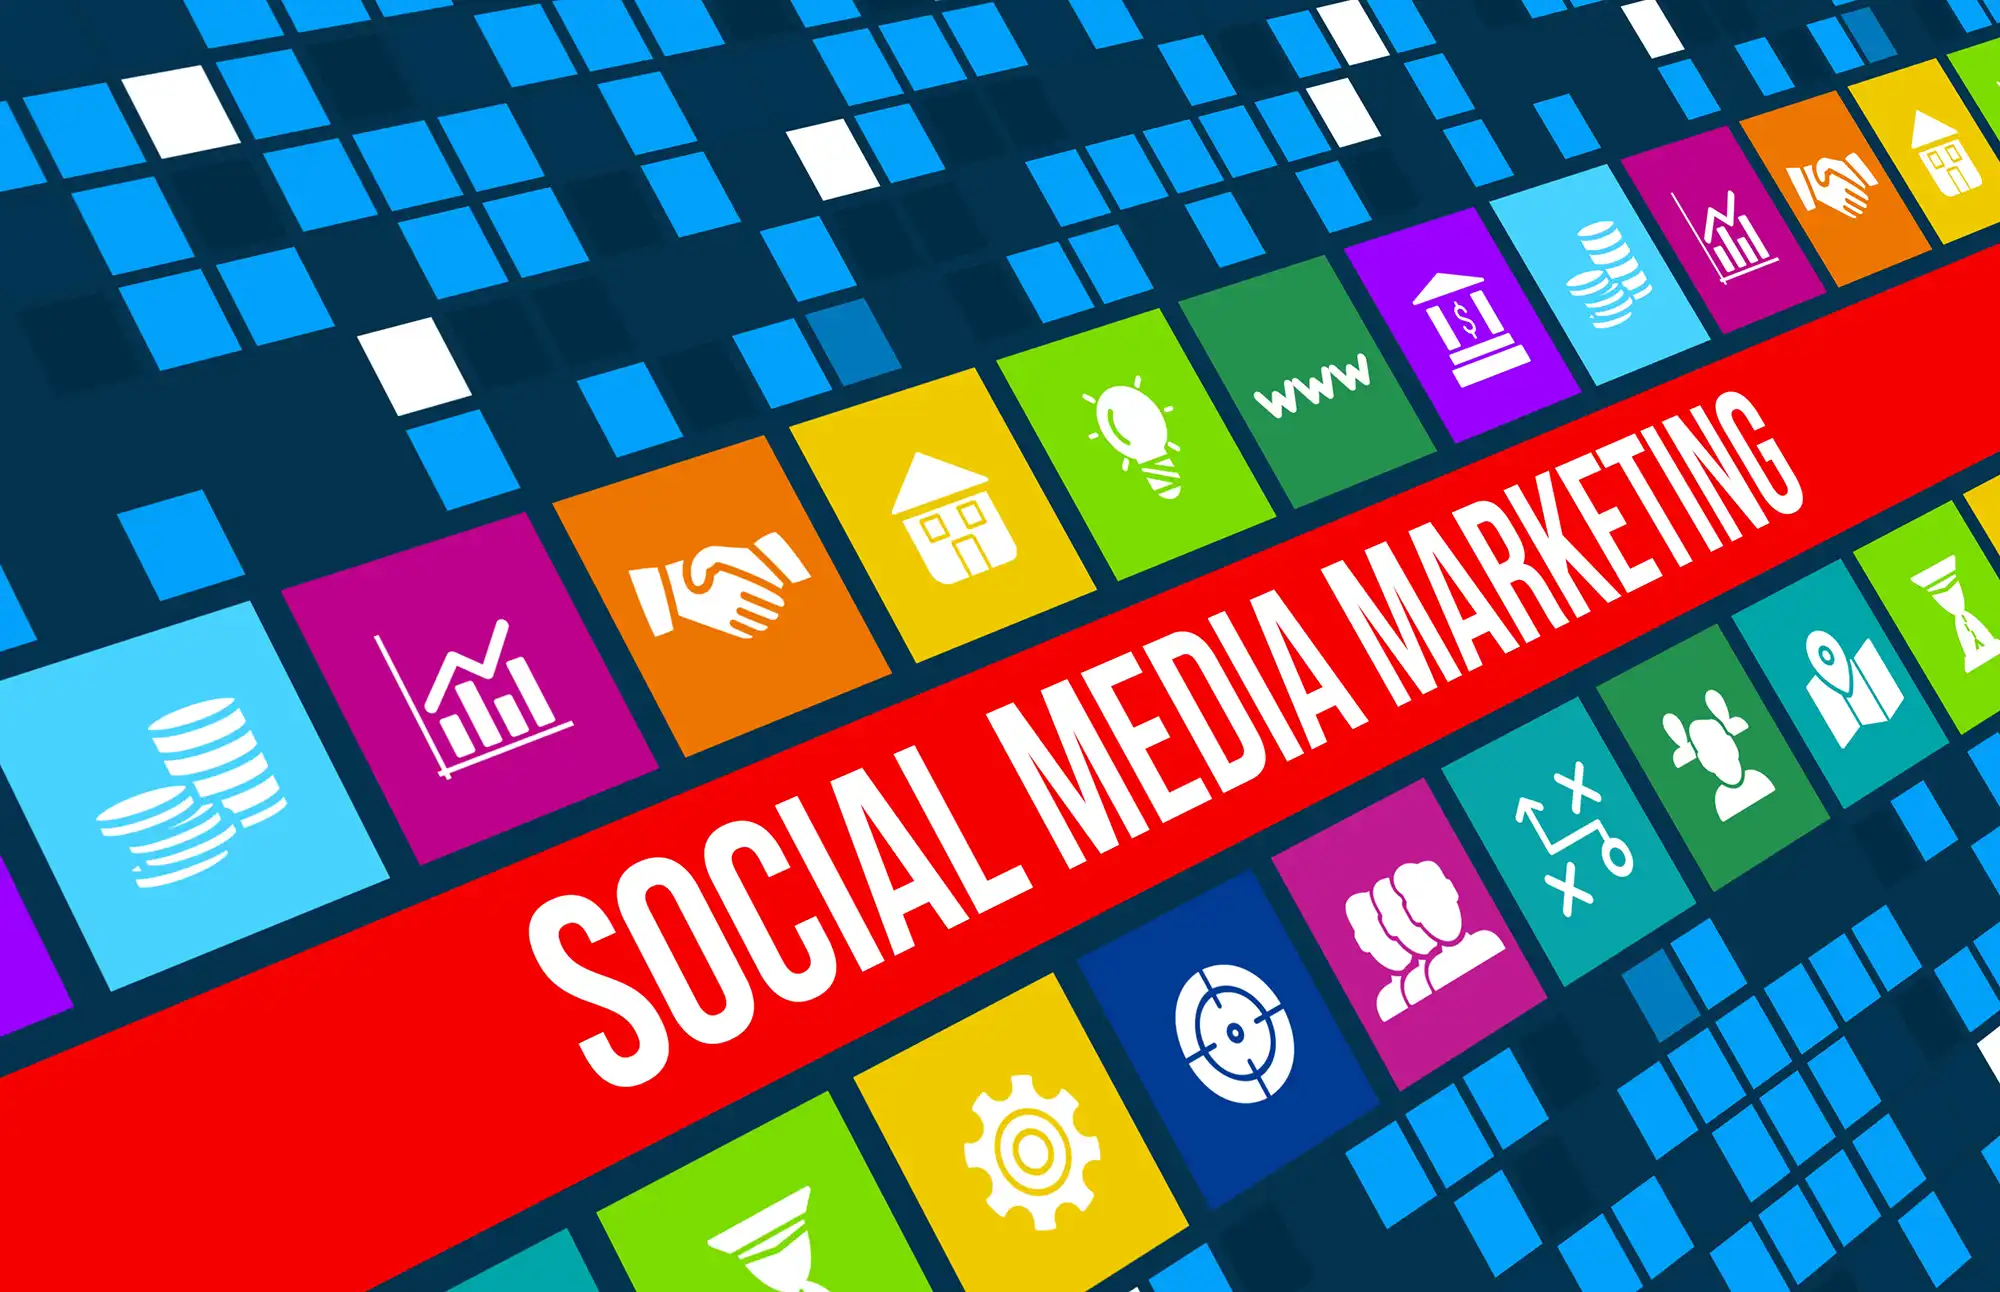 This is the cover photo for the article "Benefits of Social Media Marketing for Manufacturers".